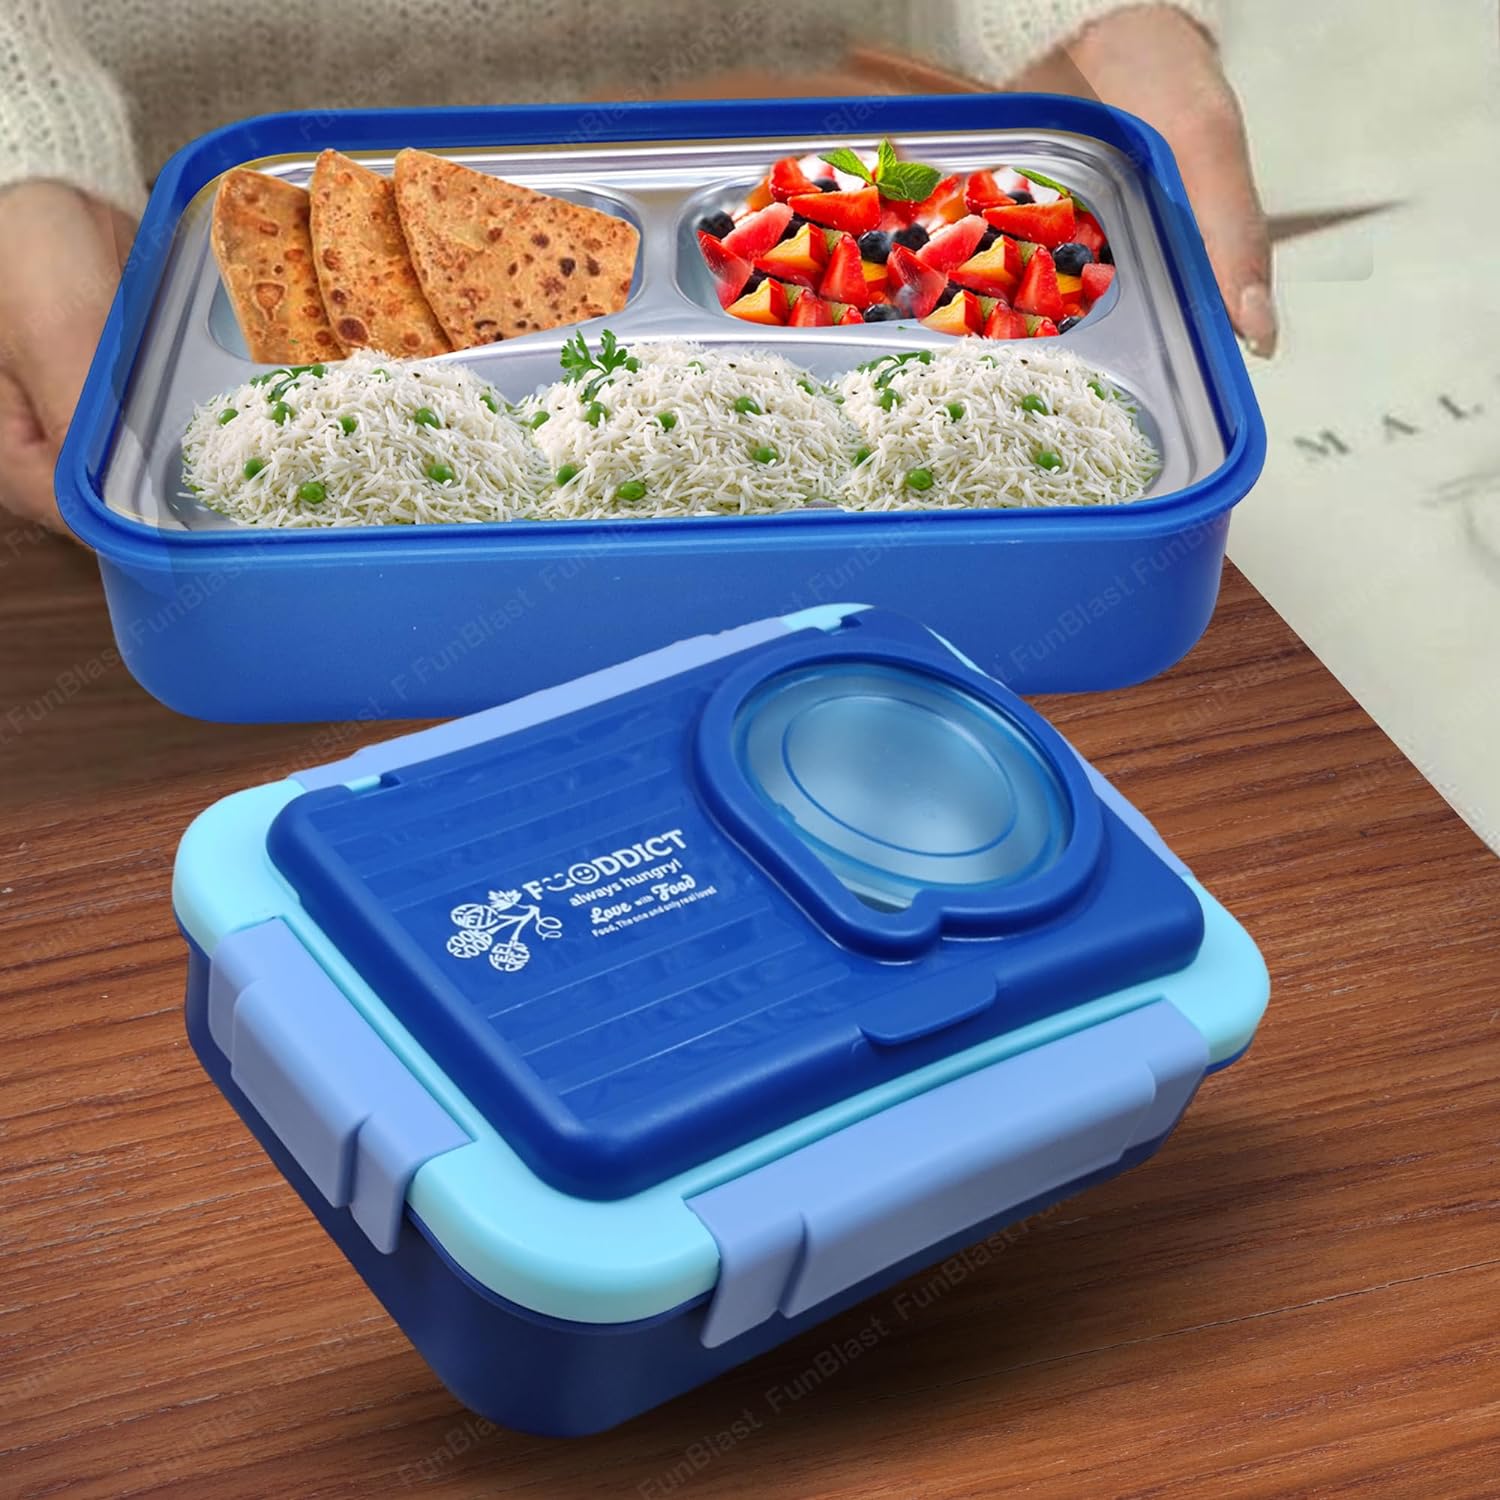 Lunch Box for Kids – Stainless Steel Lunch Box, 6 Compartment Lunch Box with Bowl, Spoon, Fork & Chopstick, Tiffin Box, Lunch Boxes for Office Men, Insulated Bento Lunch Box for Kids (Blue)